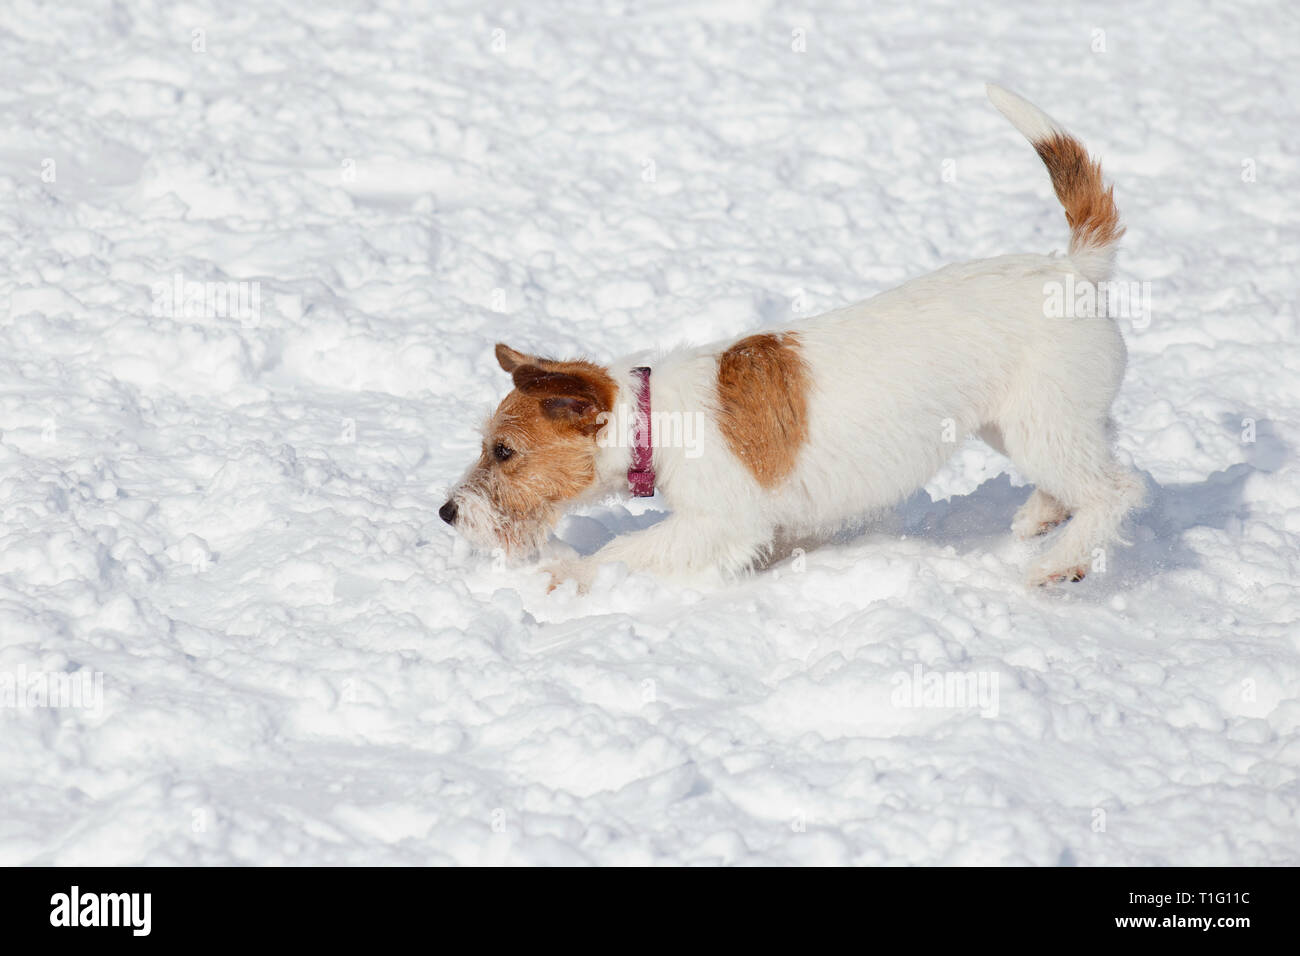 Cute jack russell terrier puppy is playing and jumping on white snow. Pet animals. Purebred dog. Stock Photo